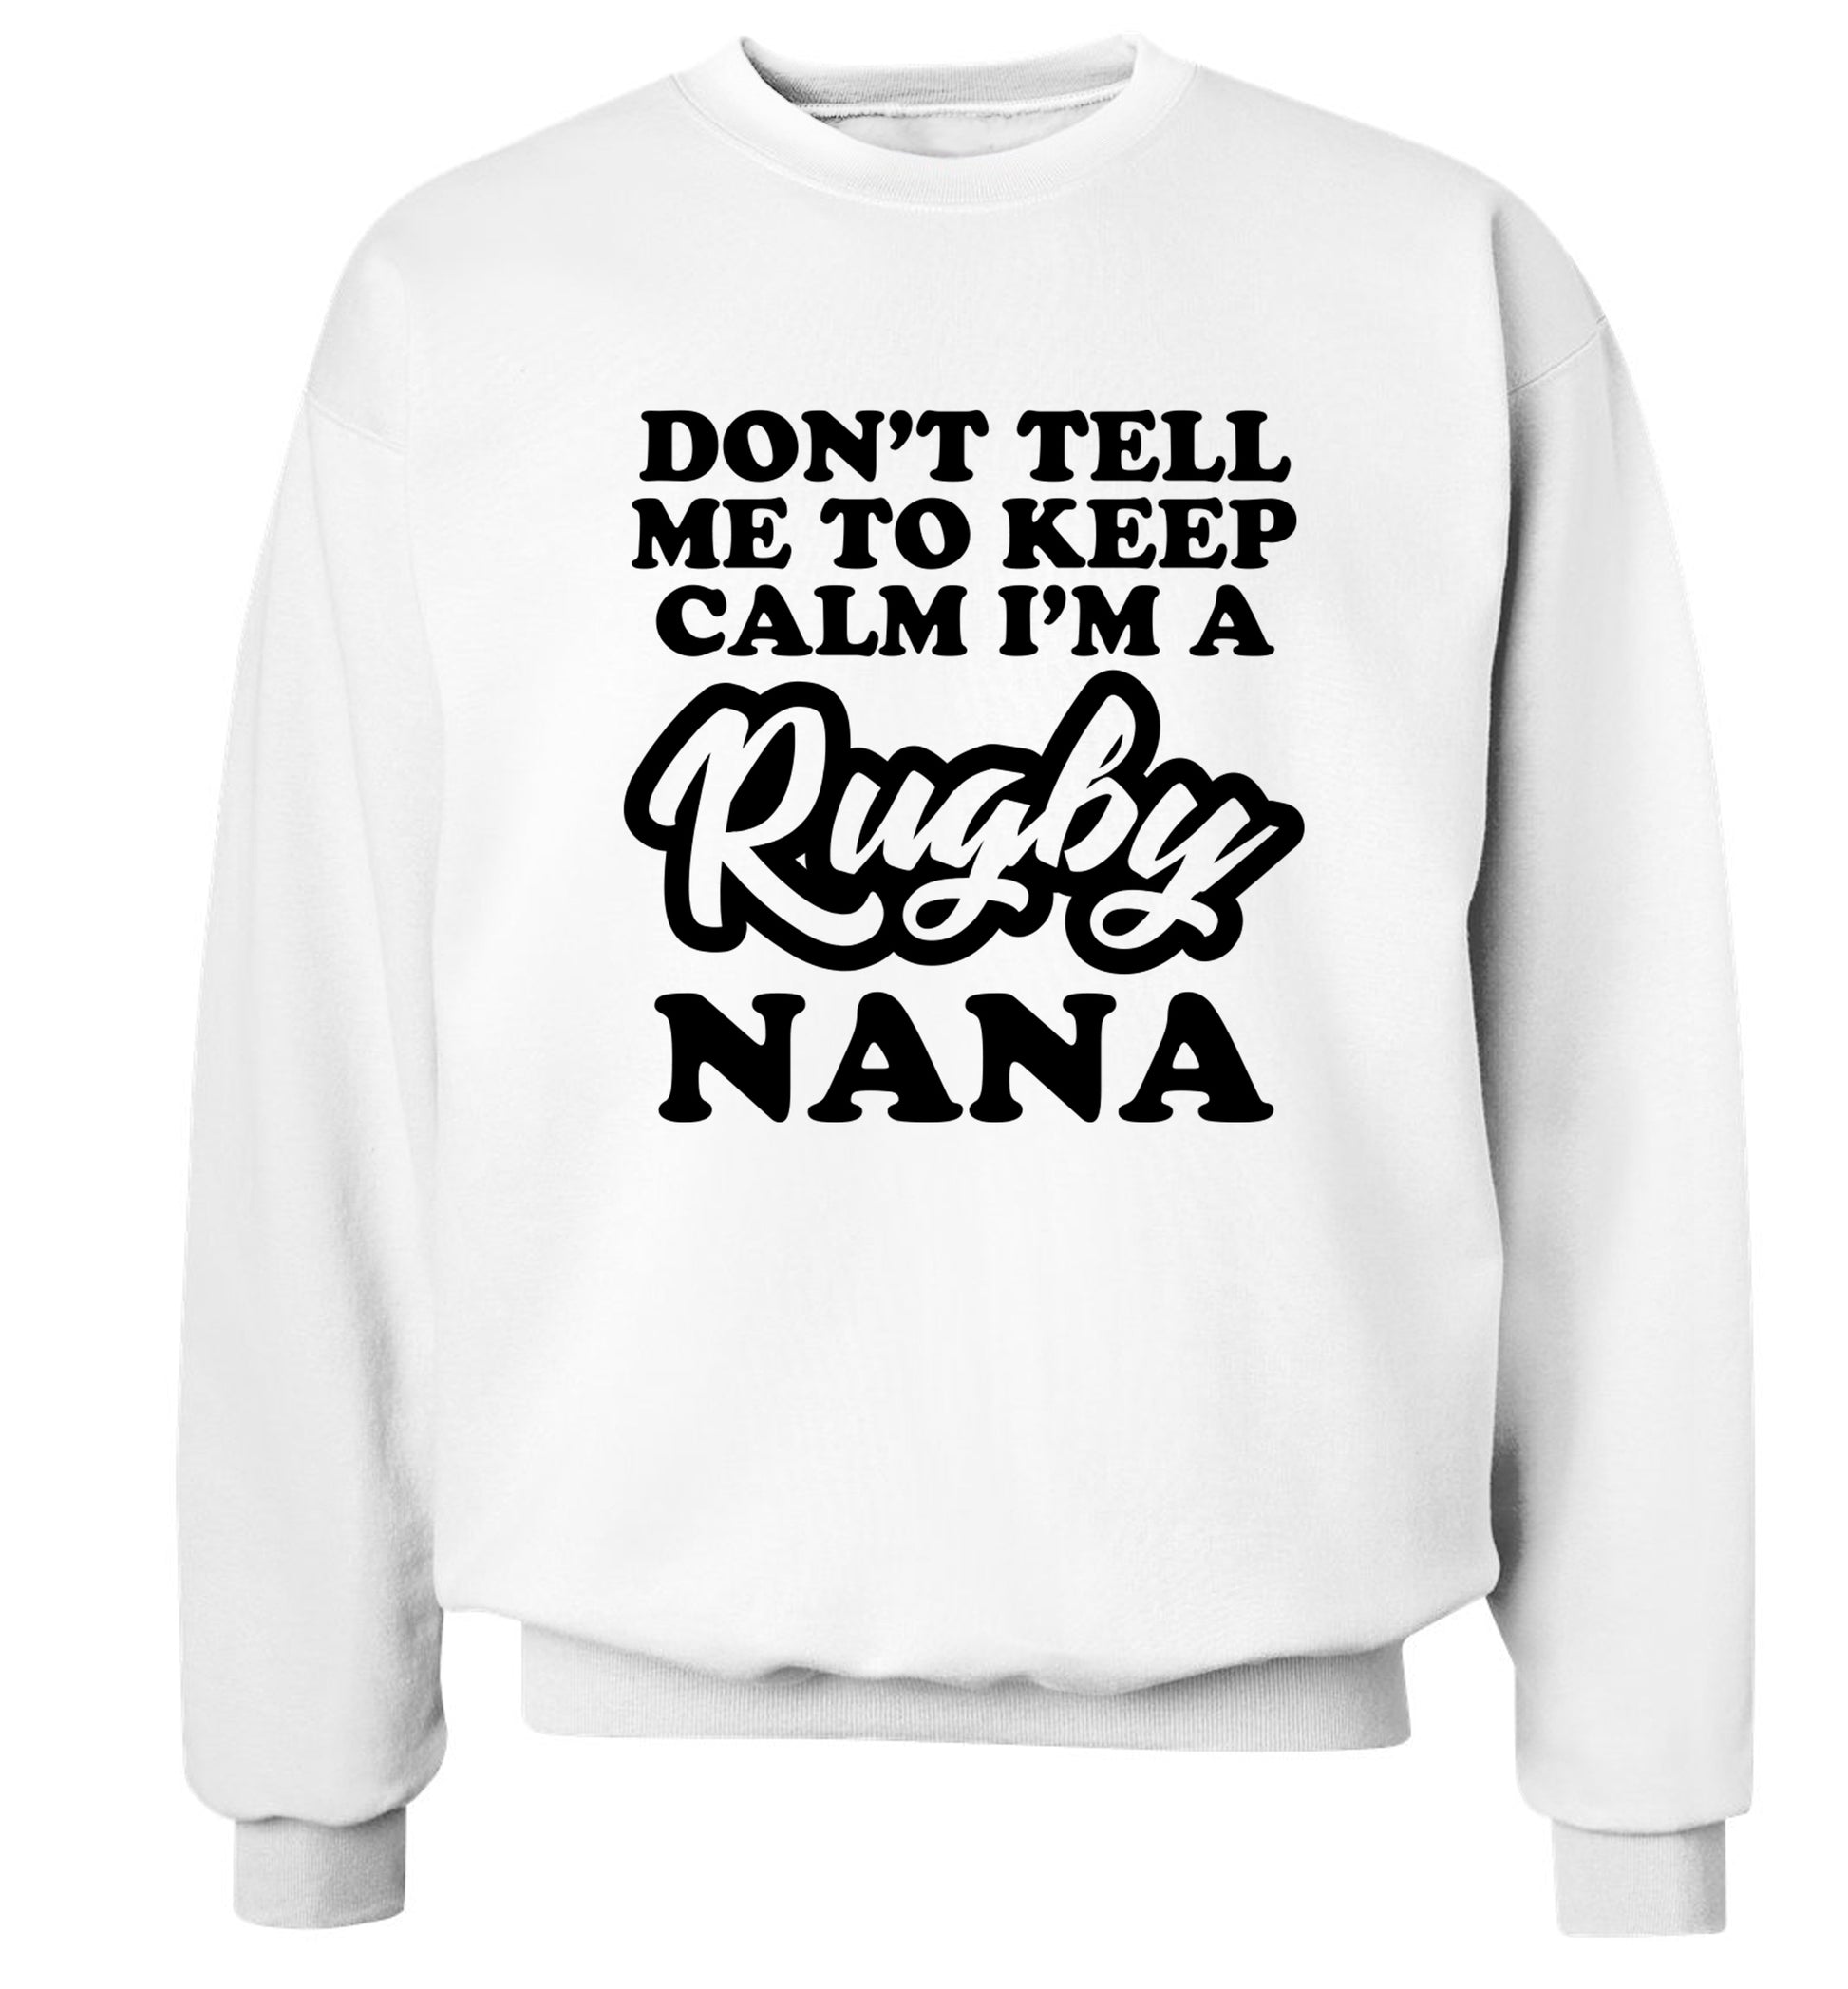 Don't tell me to keep calm I'm a rugby nana Adult's unisex white Sweater 2XL